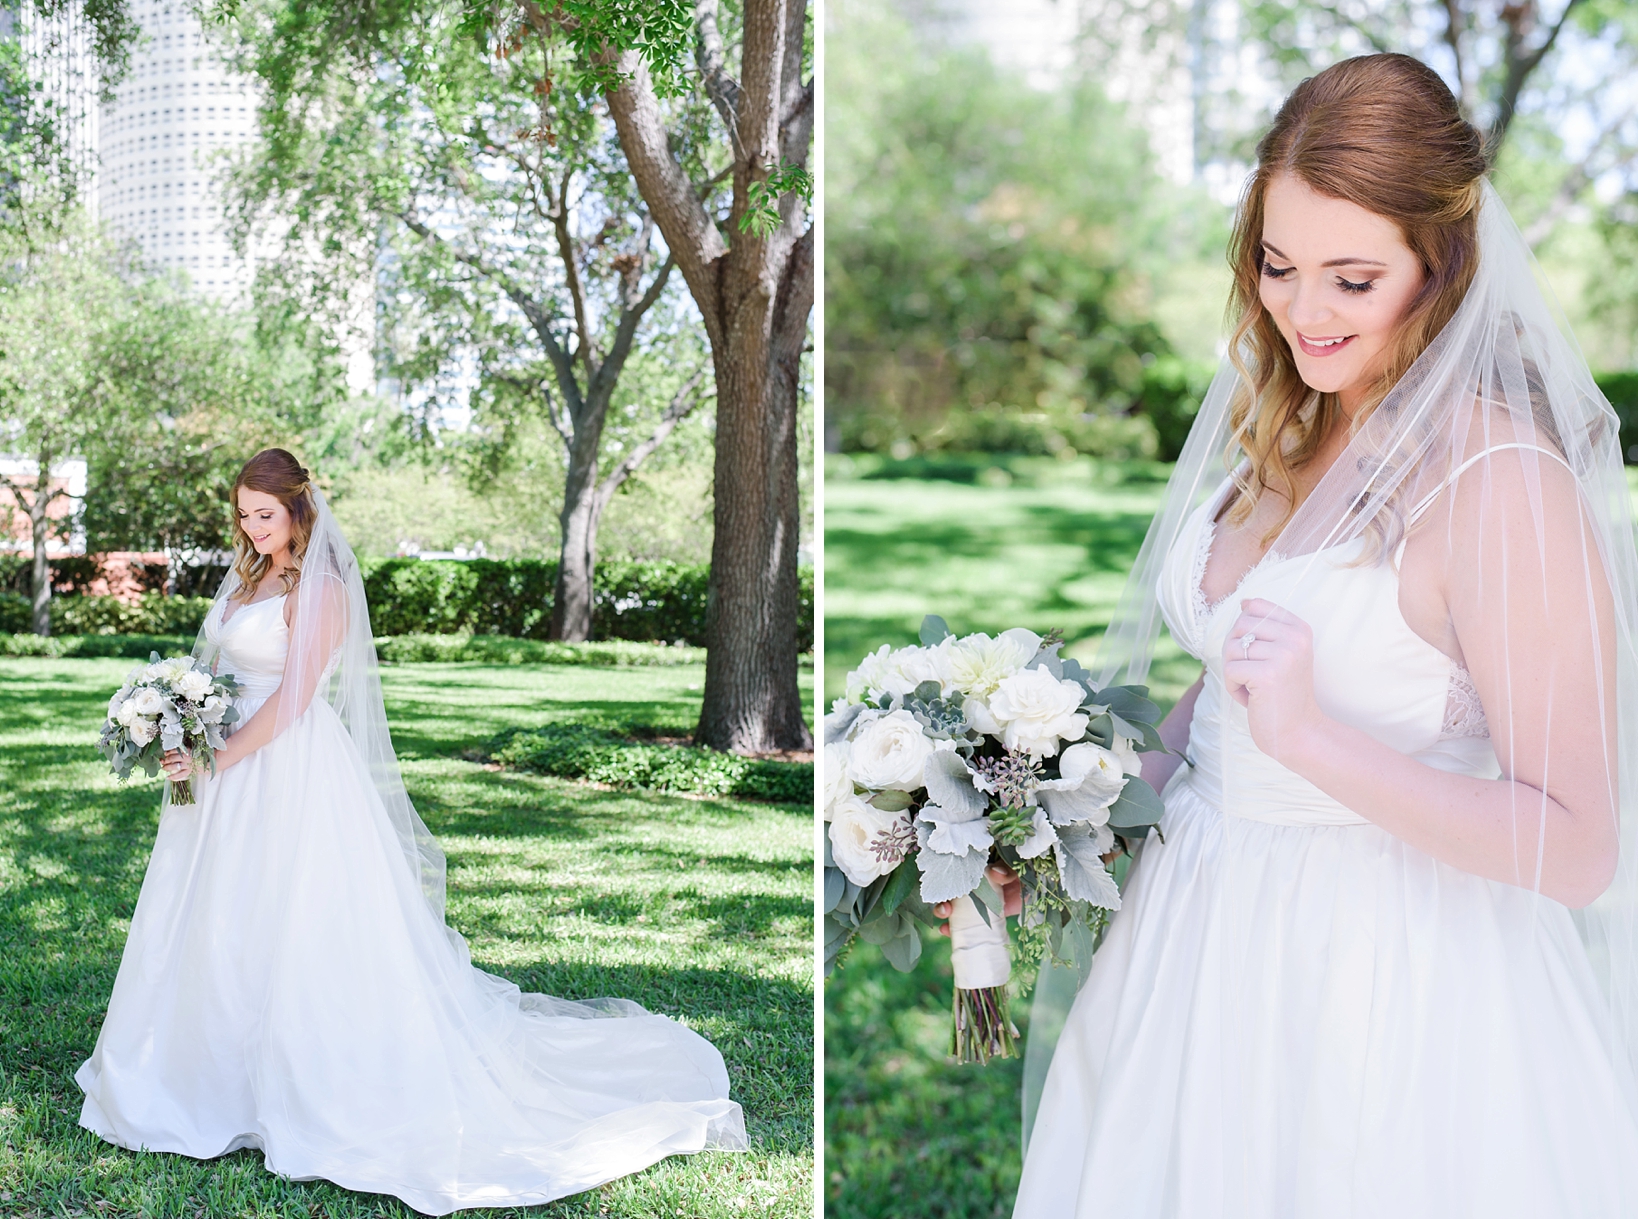 Bridal portraits in the greenery of the University of Tampa by Sarah & Ben Photography